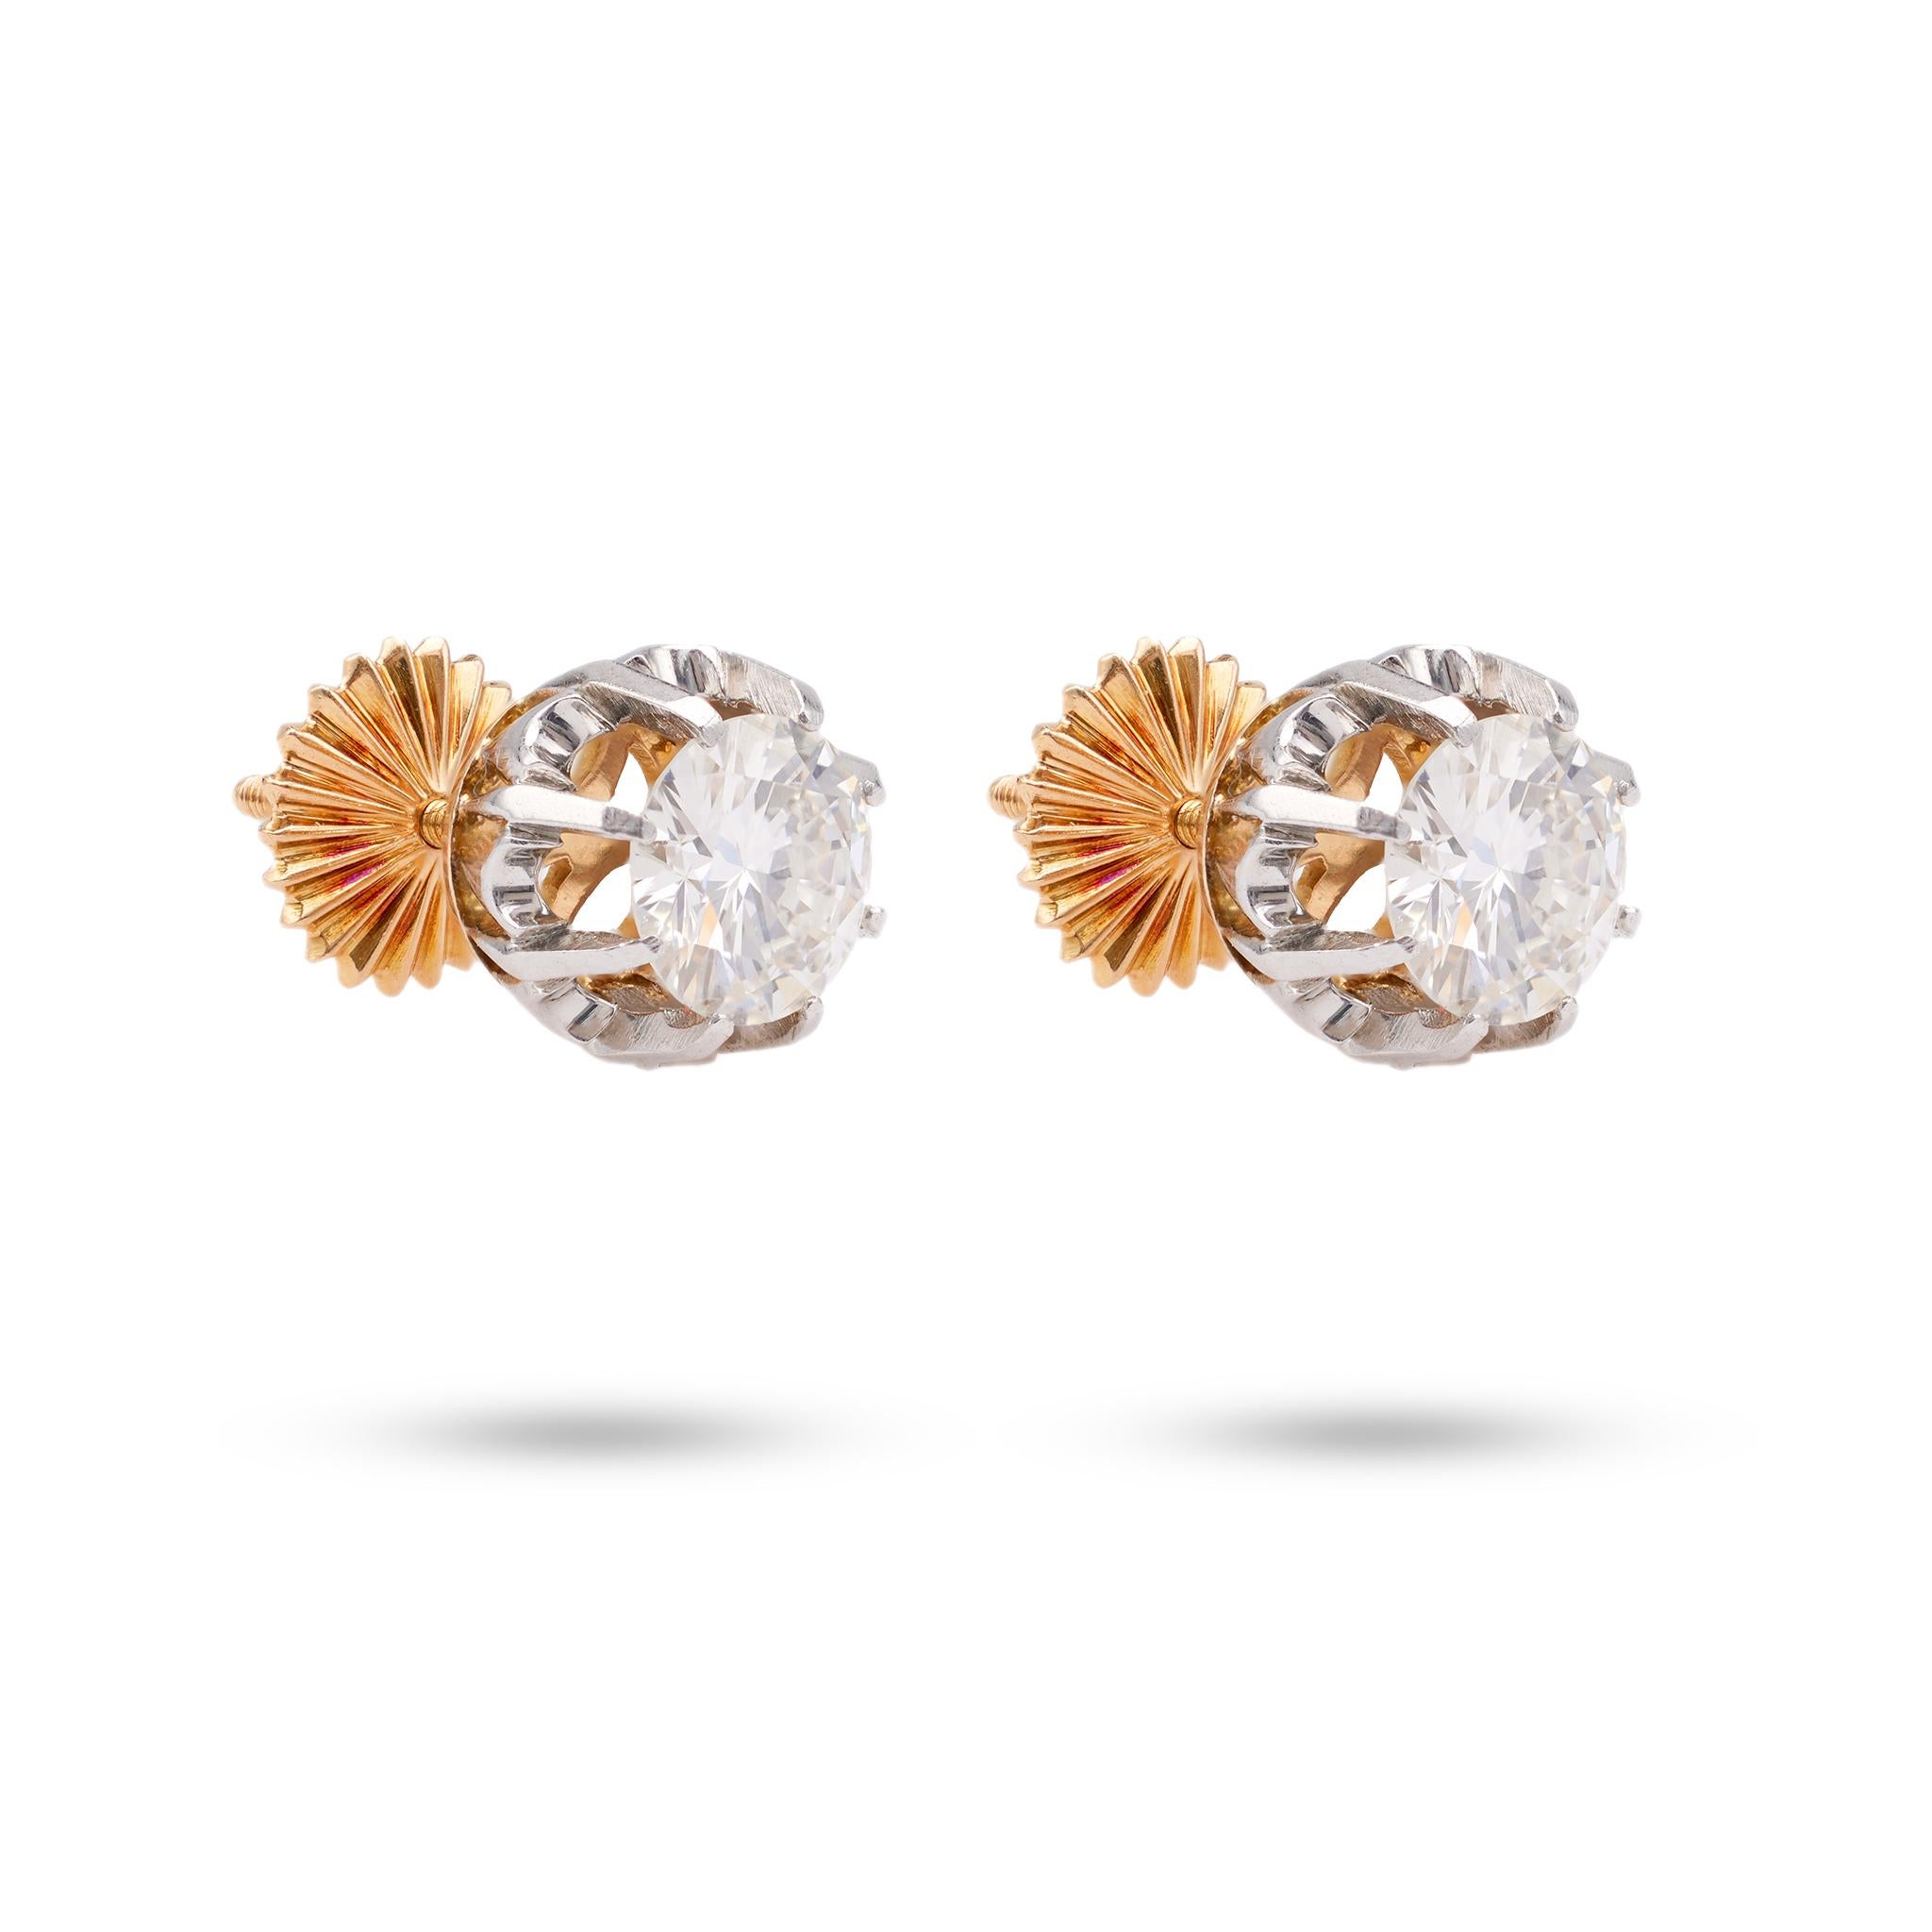 Brilliant Cut Antique Inspired 1.50 Carat Total Weight Diamond Stud Earrings For Sale